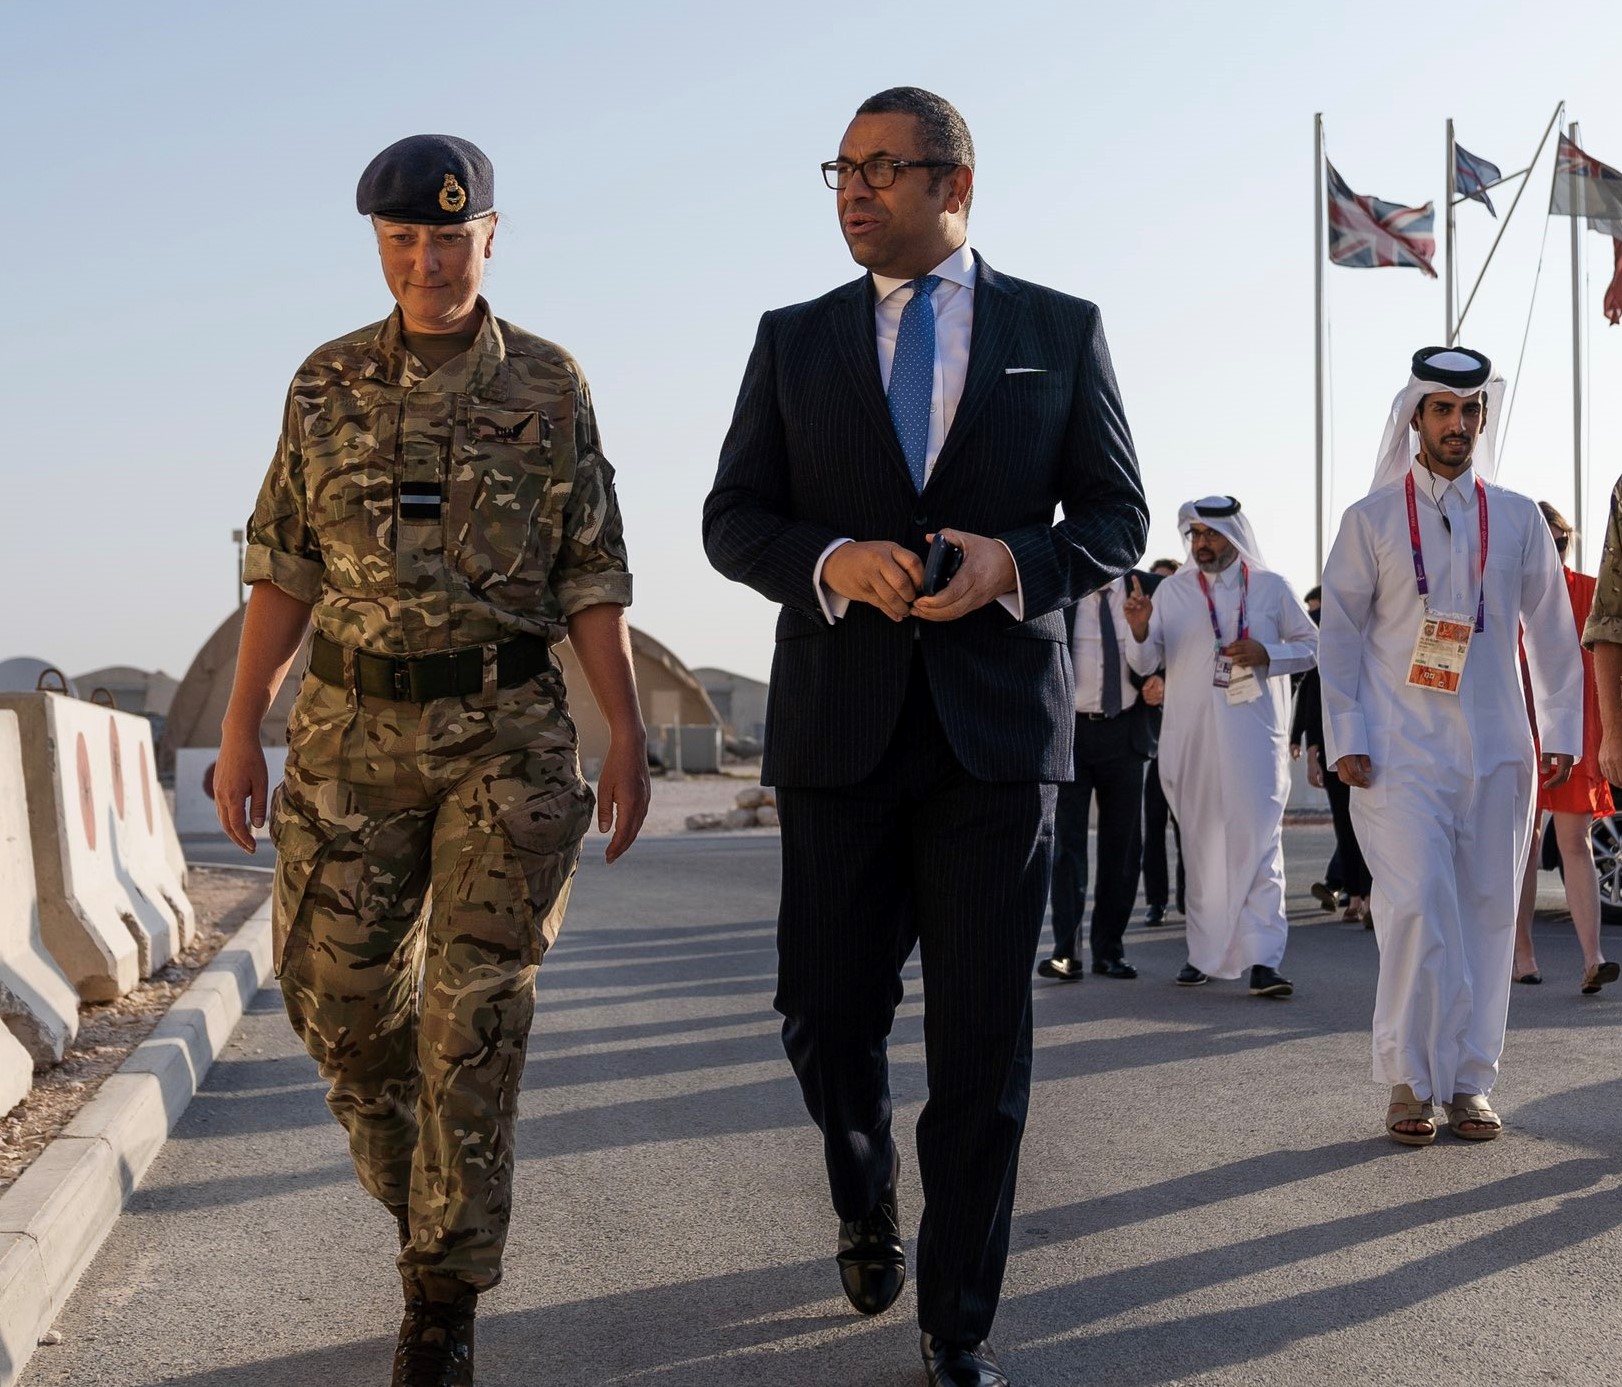 Image shows RAF aviator walking with civilians wearing middle eastern attire.